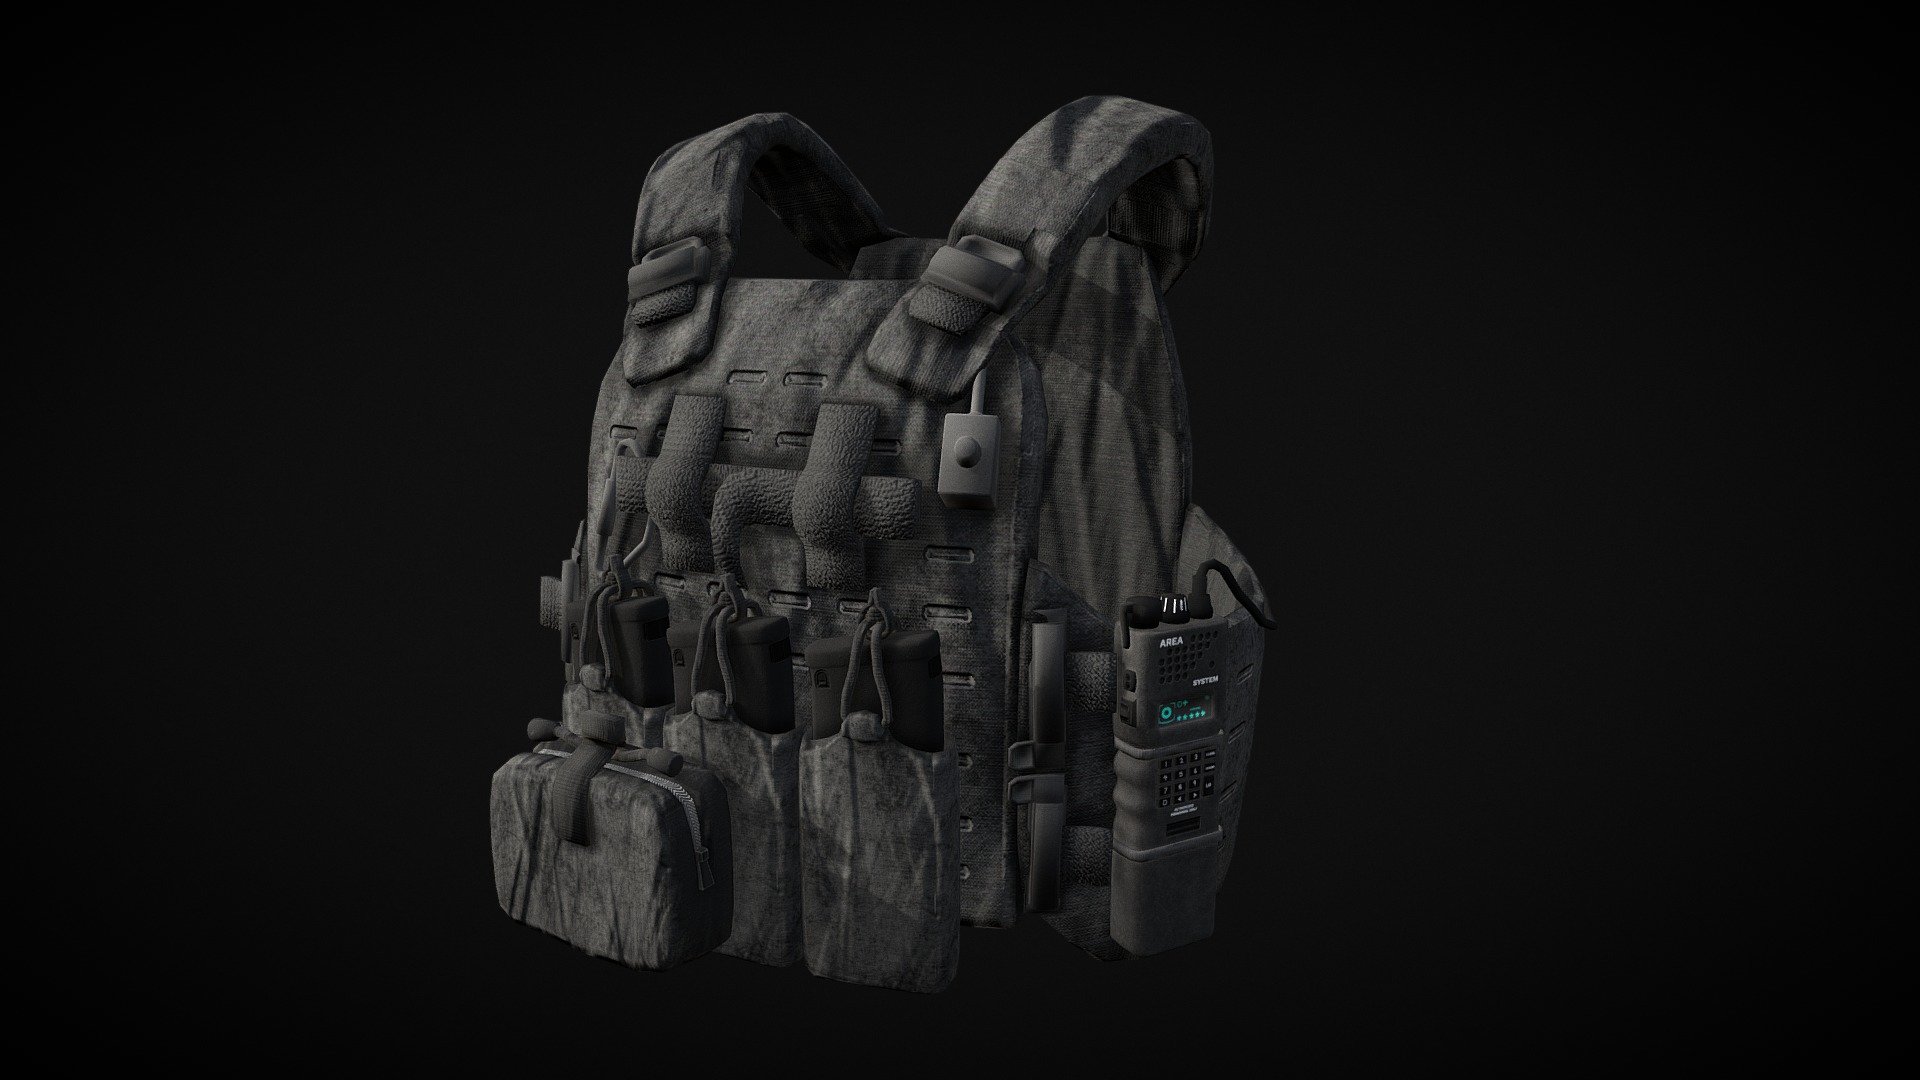 Avab Military Body Armor - Model/Art by Outworld Studios

Must give credit to Outworld Studios if using the asset.

Show support by joining my discord: https://discord.gg/EgWSkp8Cxn - AVAB Vest Military Body Armor - Buy Royalty Free 3D model by Outworld Studios (@outworldstudios) 3d model